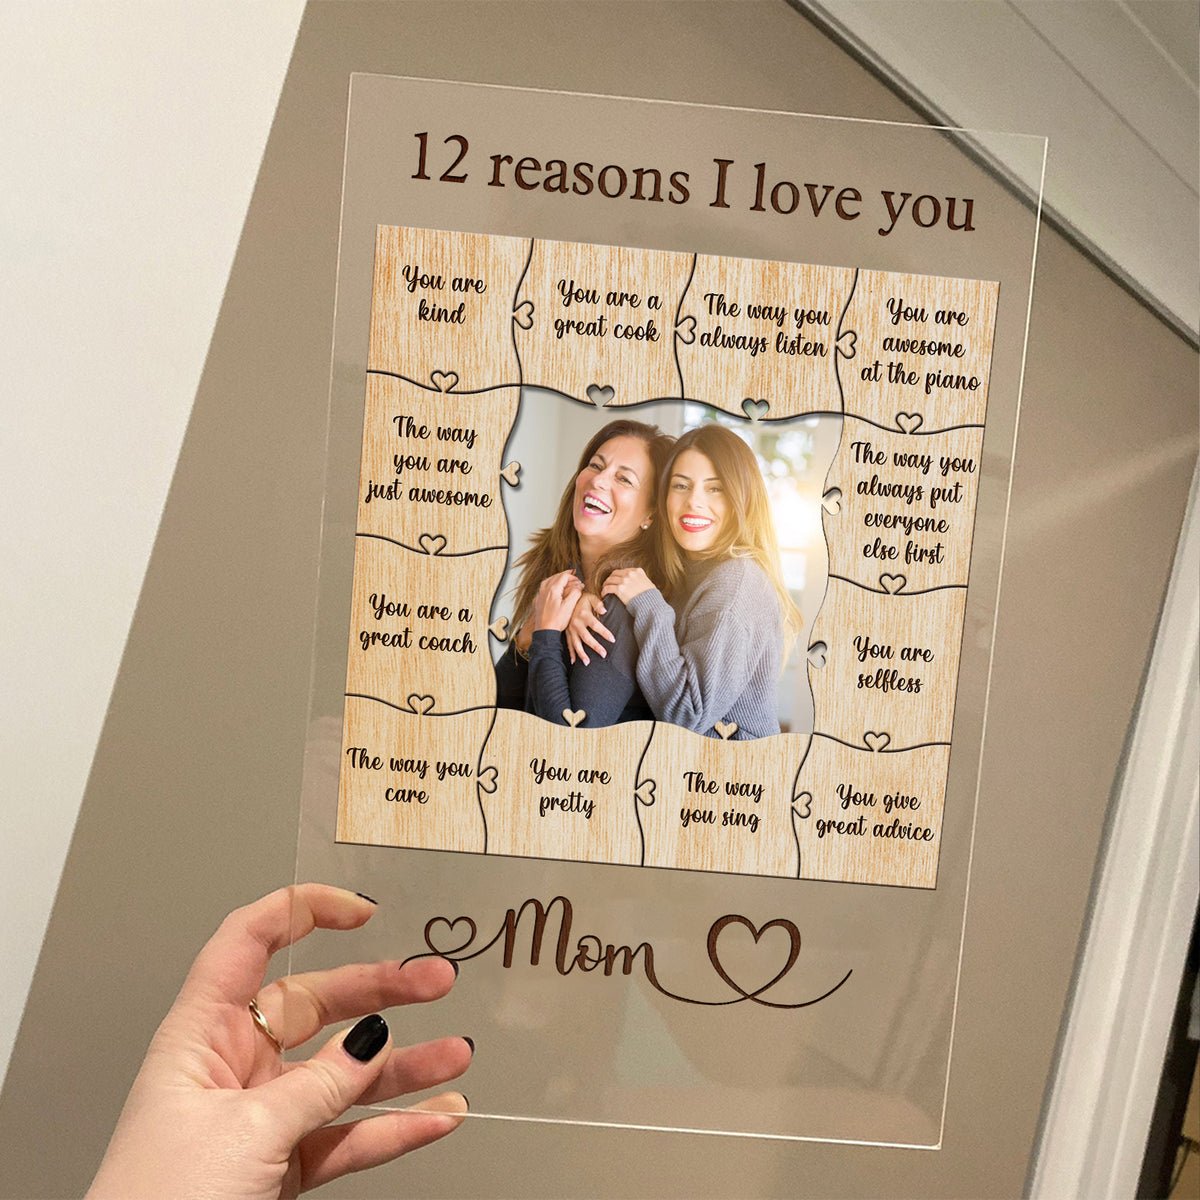 12 Reasons I Love You, Mom - Personalized Acrylic Plaque - Best Gift For Mother